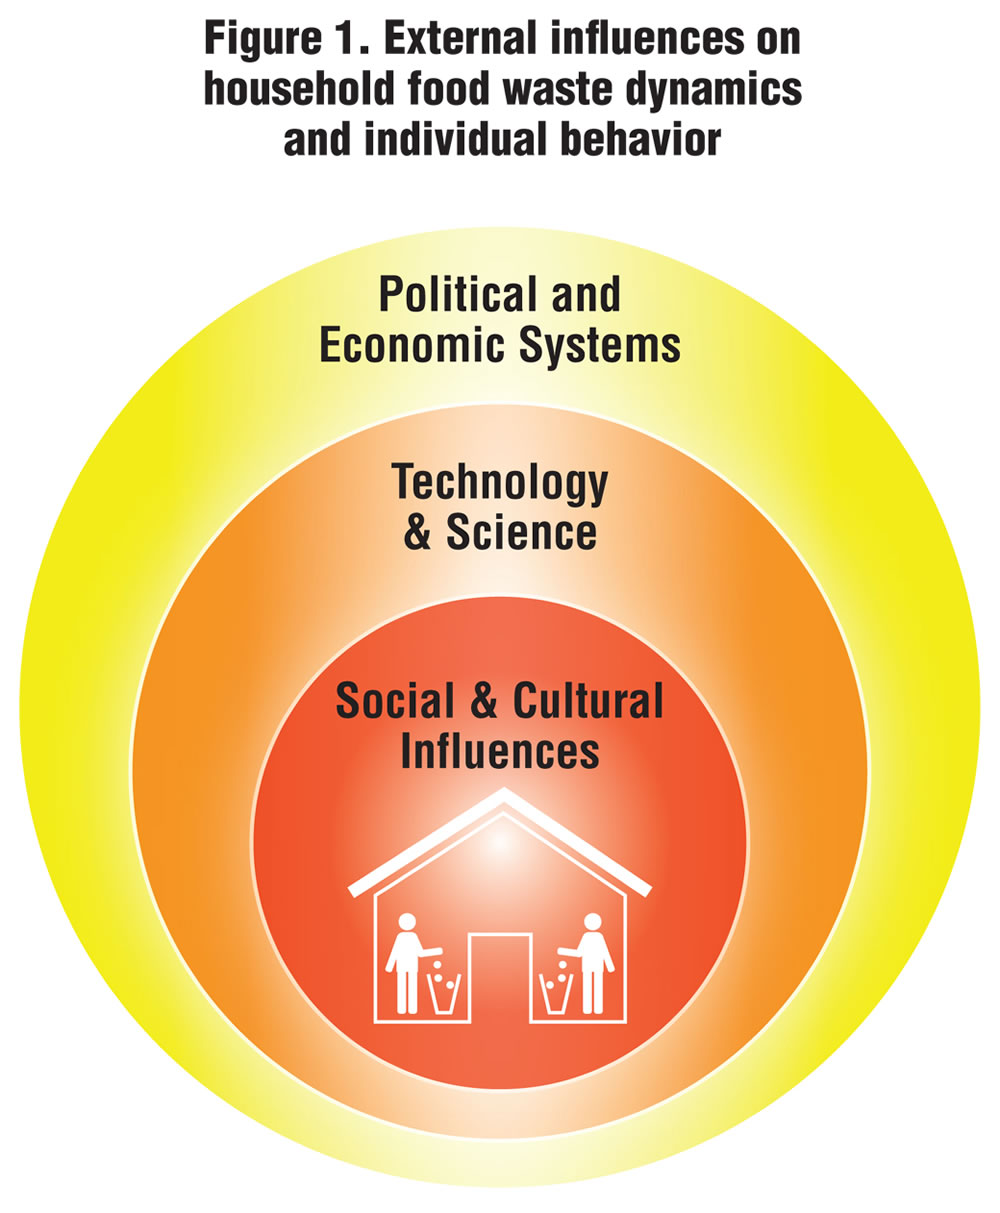 Figure 1. External influences on household food waste dynamics and individual behavior